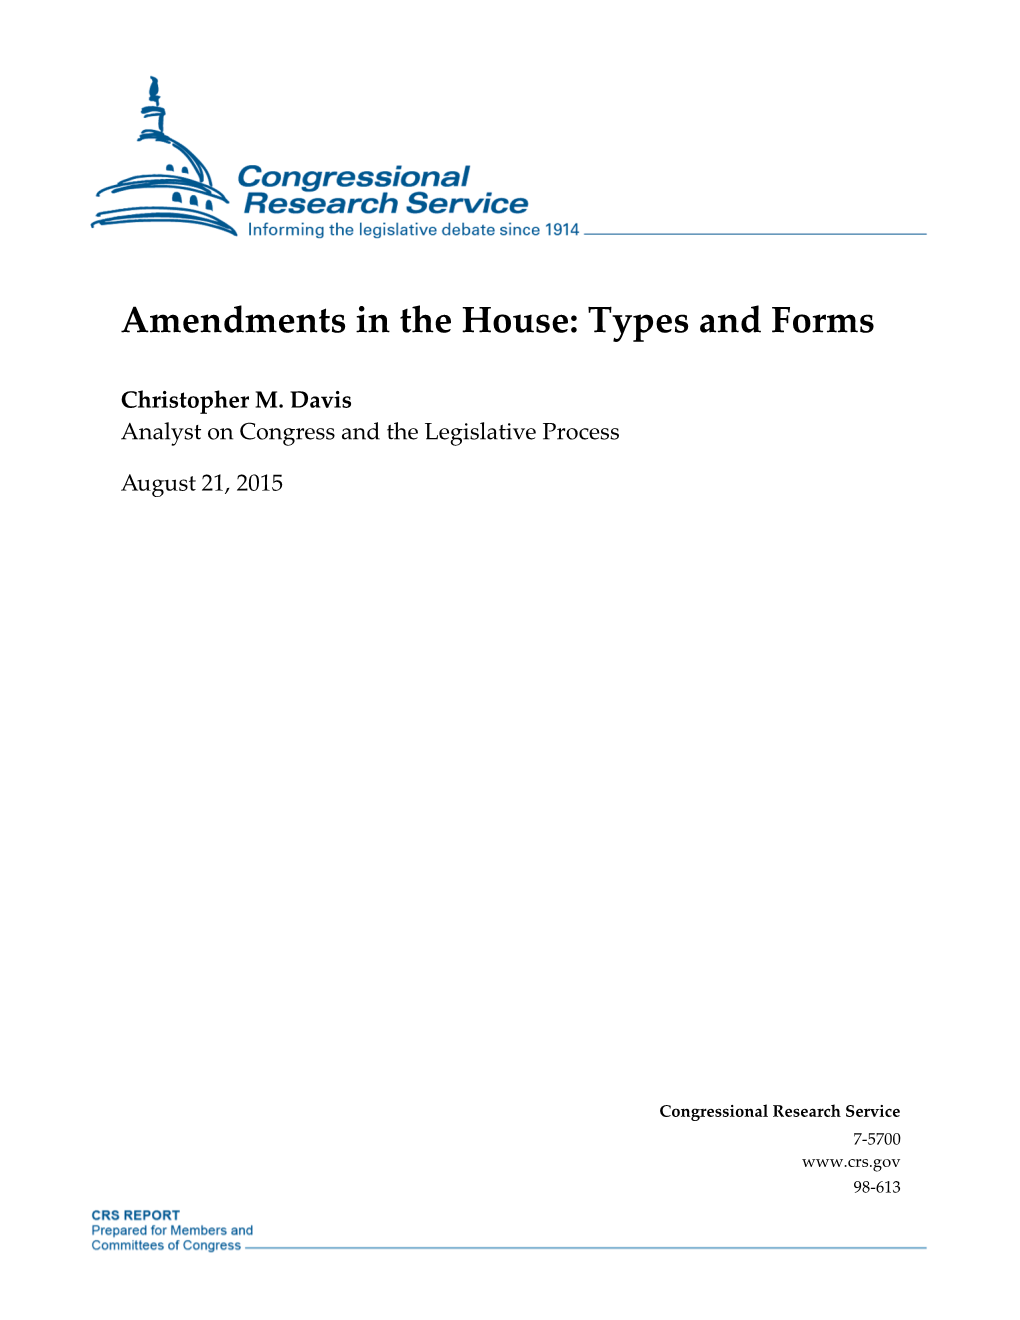 Amendments in the House: Types and Forms